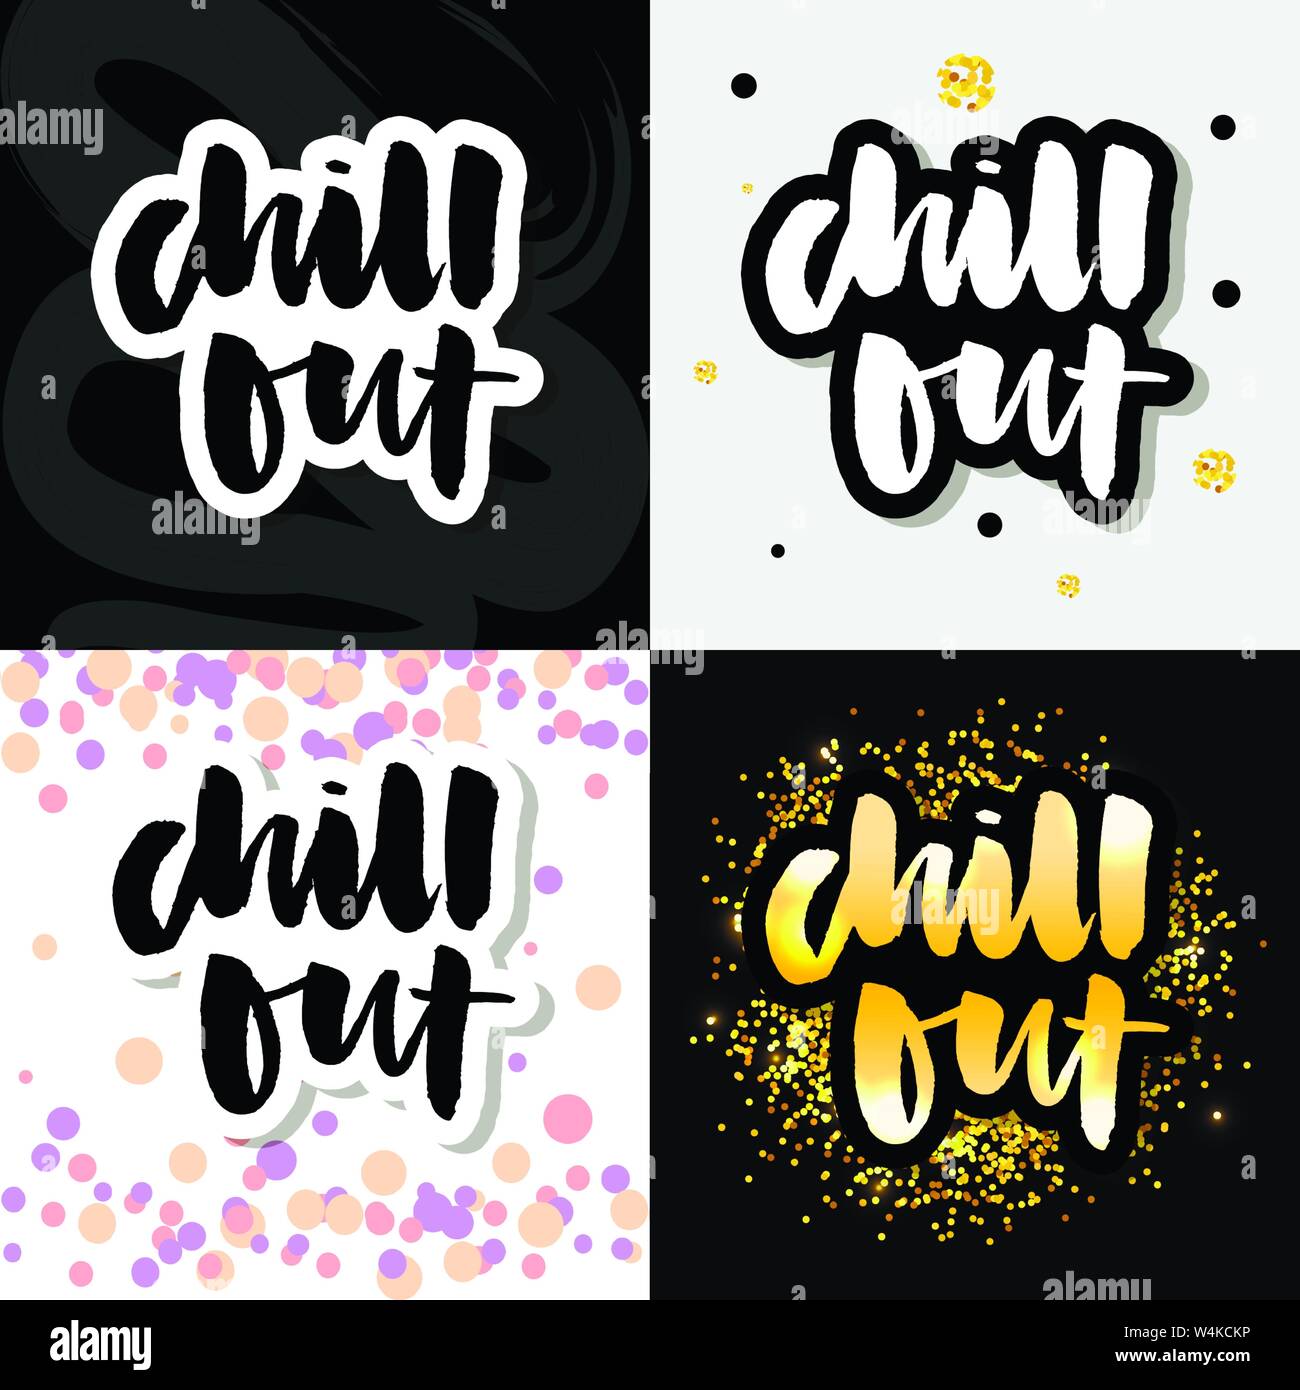 Chill out. Vector lettering text Stock Vector